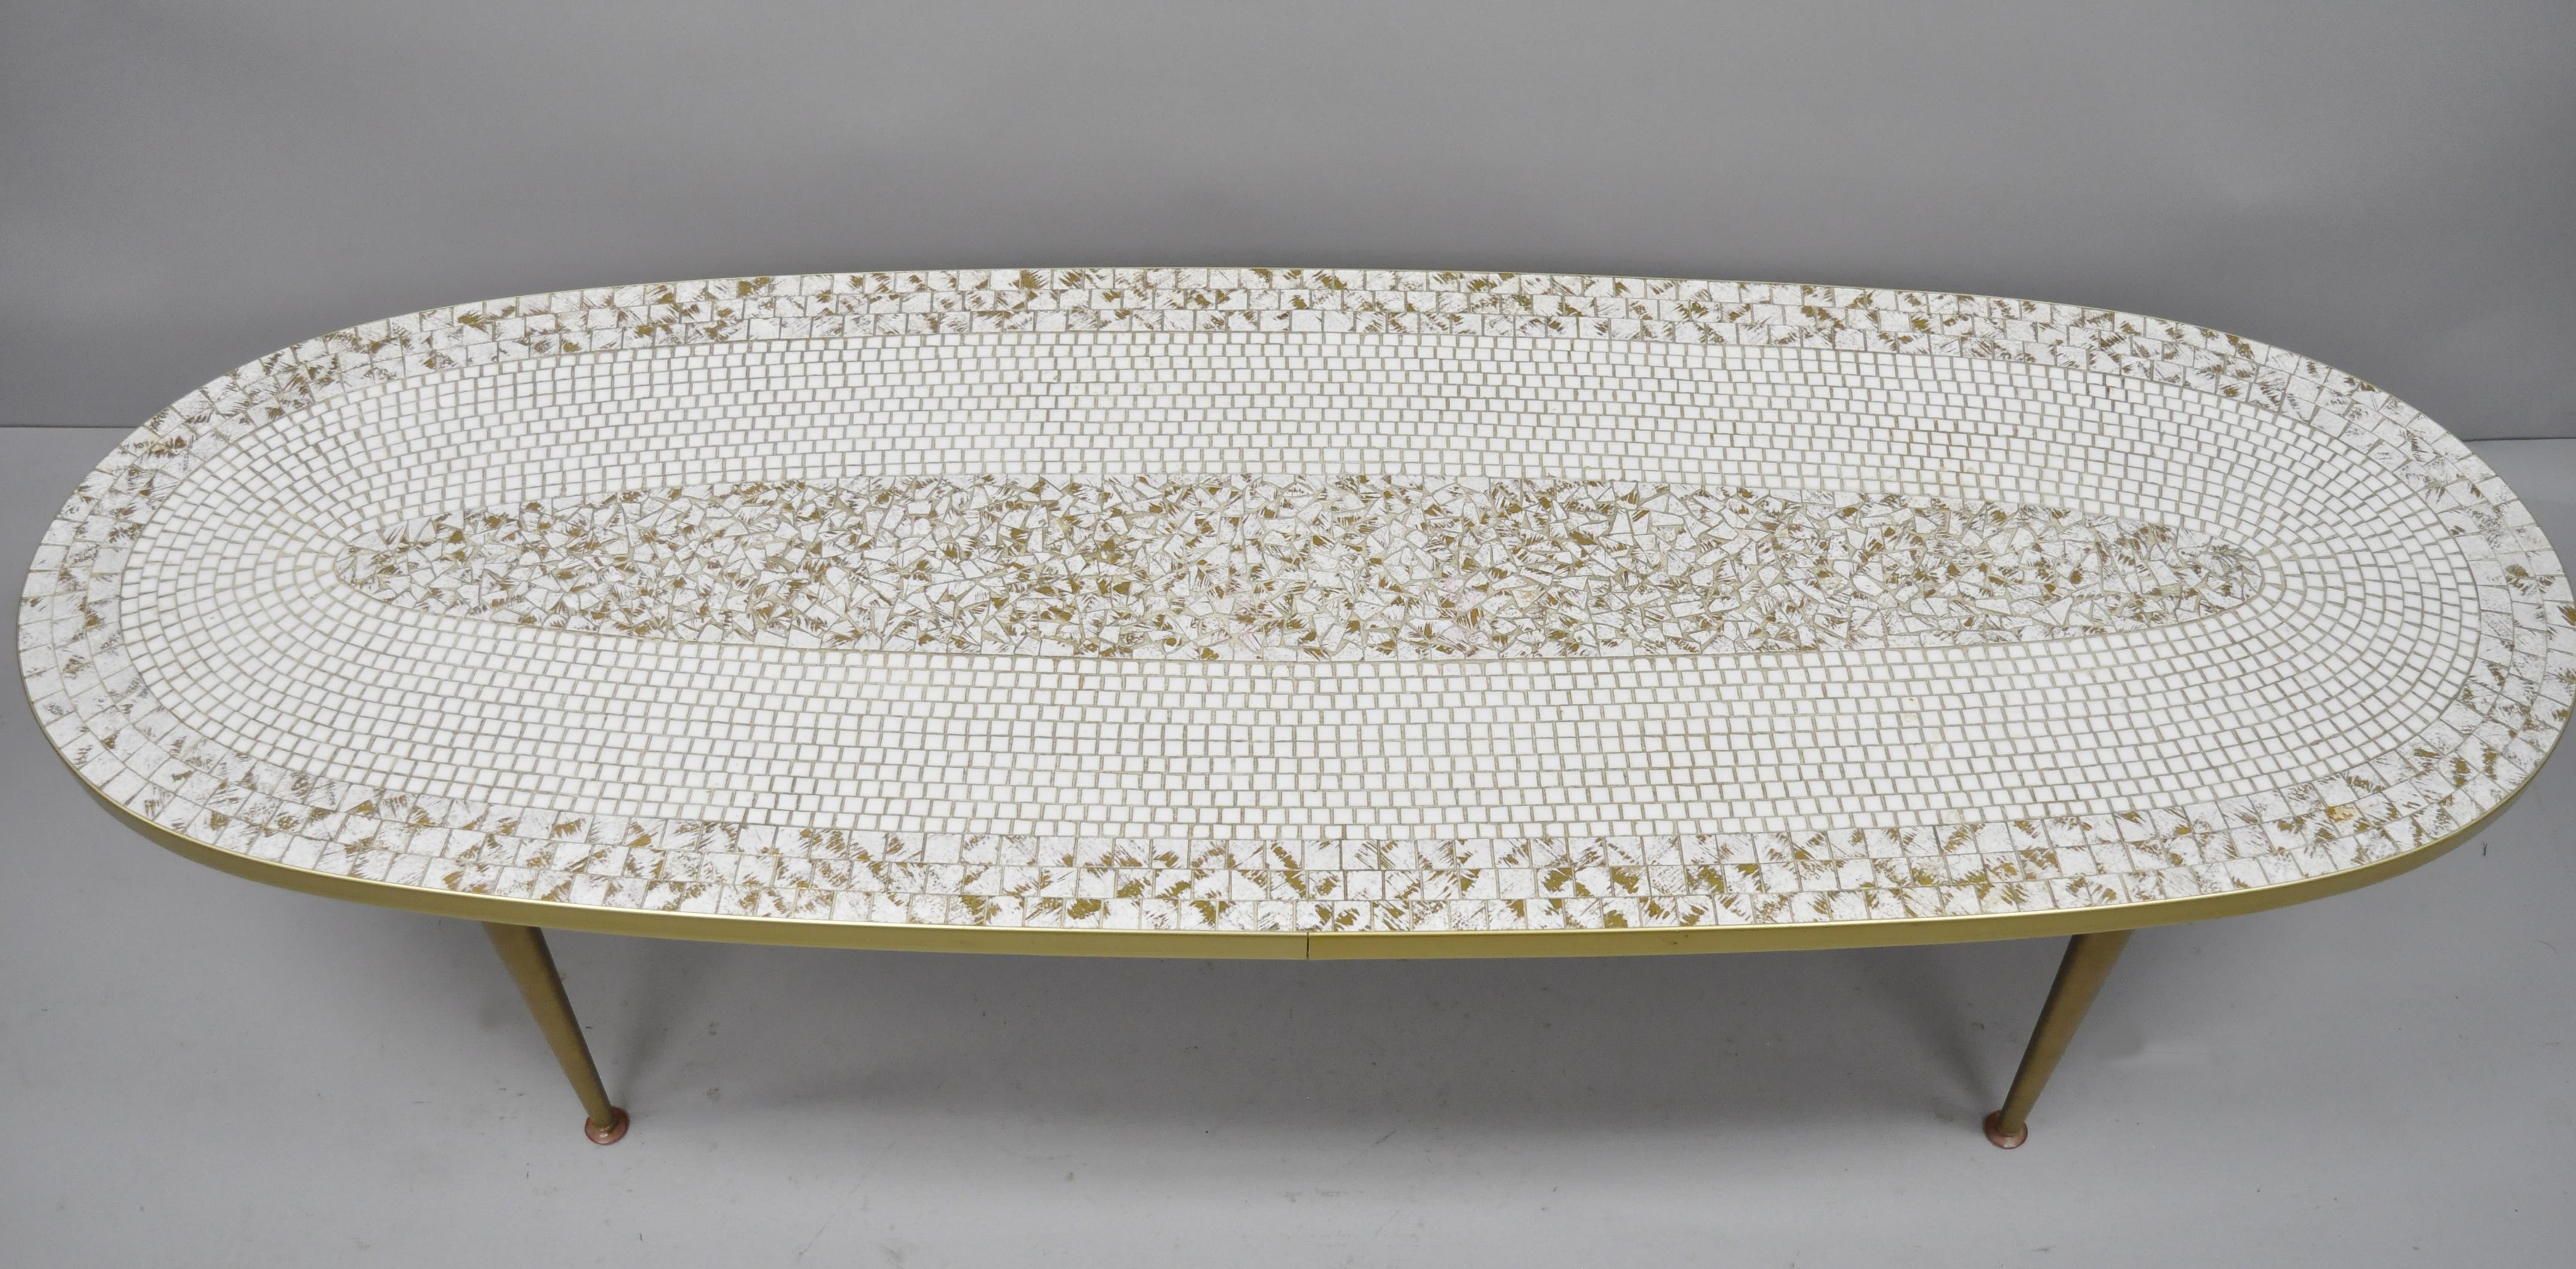 Mid-Century Modern oval surfboard white gold mosaic tile top long coffee table. Item features large oval 